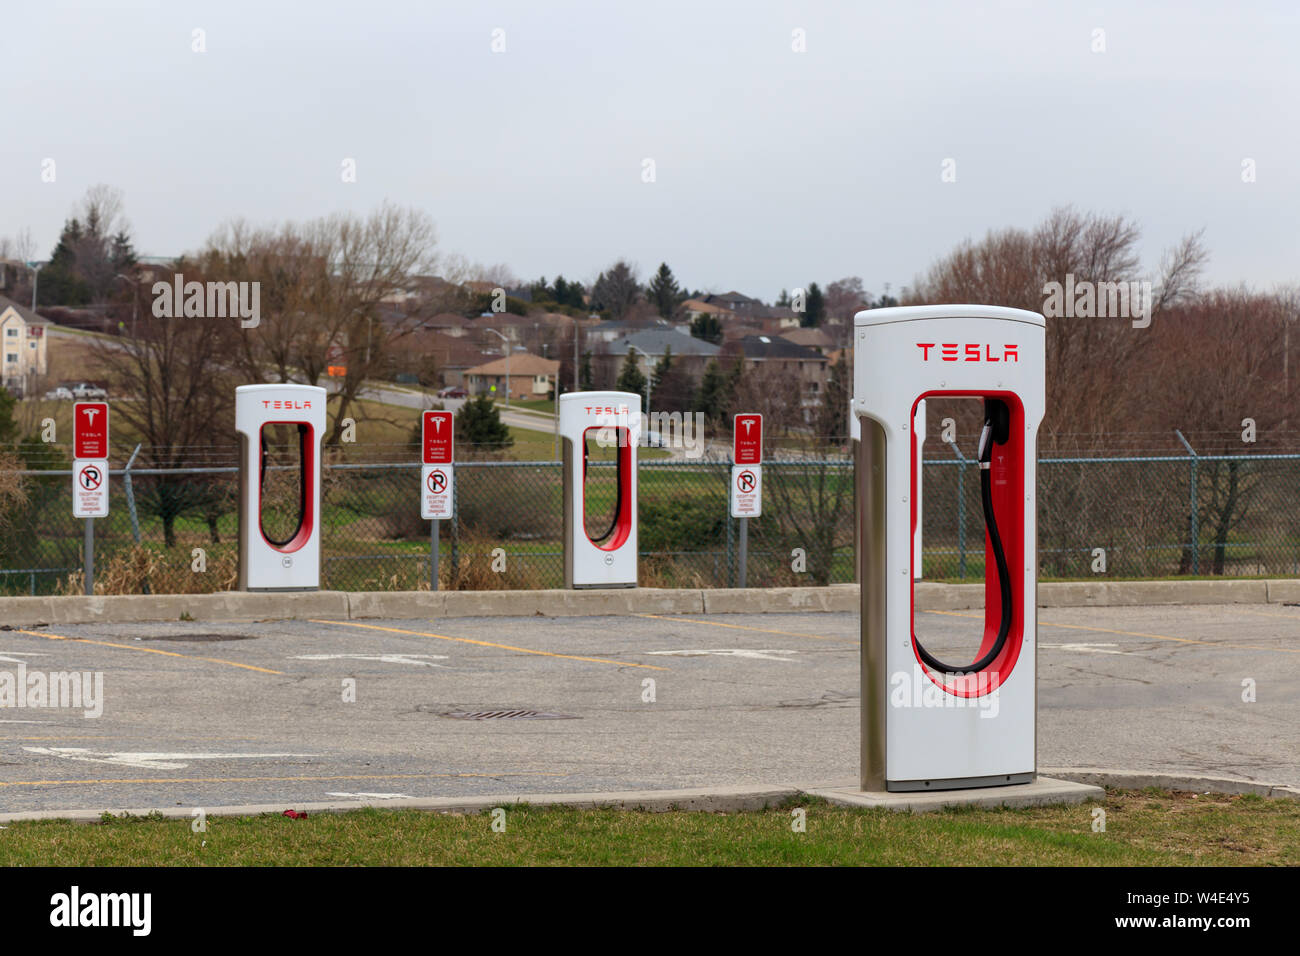 Tesla Supercharger Stall at Woodstock, Ontario Station. Stock Photo